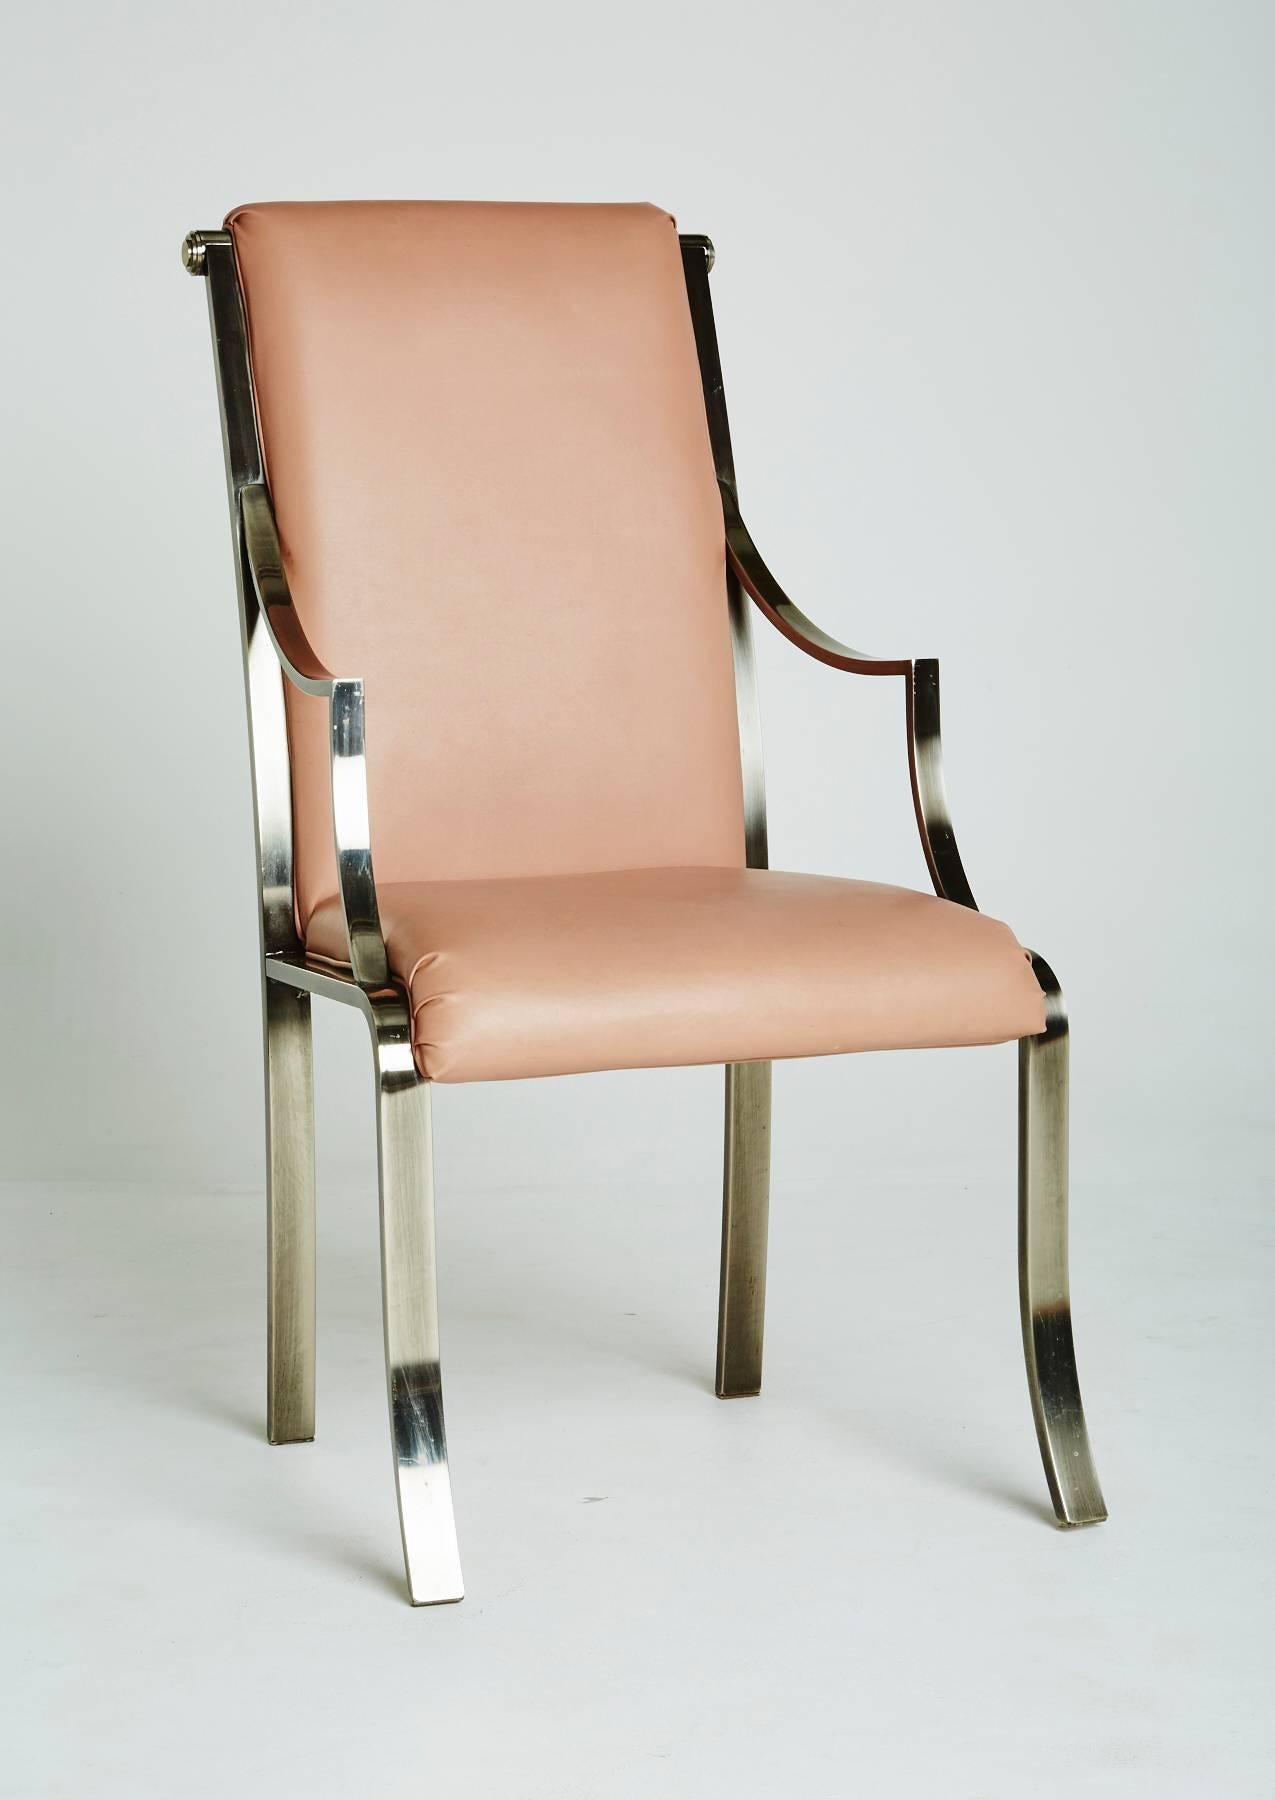 Late 20th Century Milo Baughman for Design Institute of America Dining Chairs